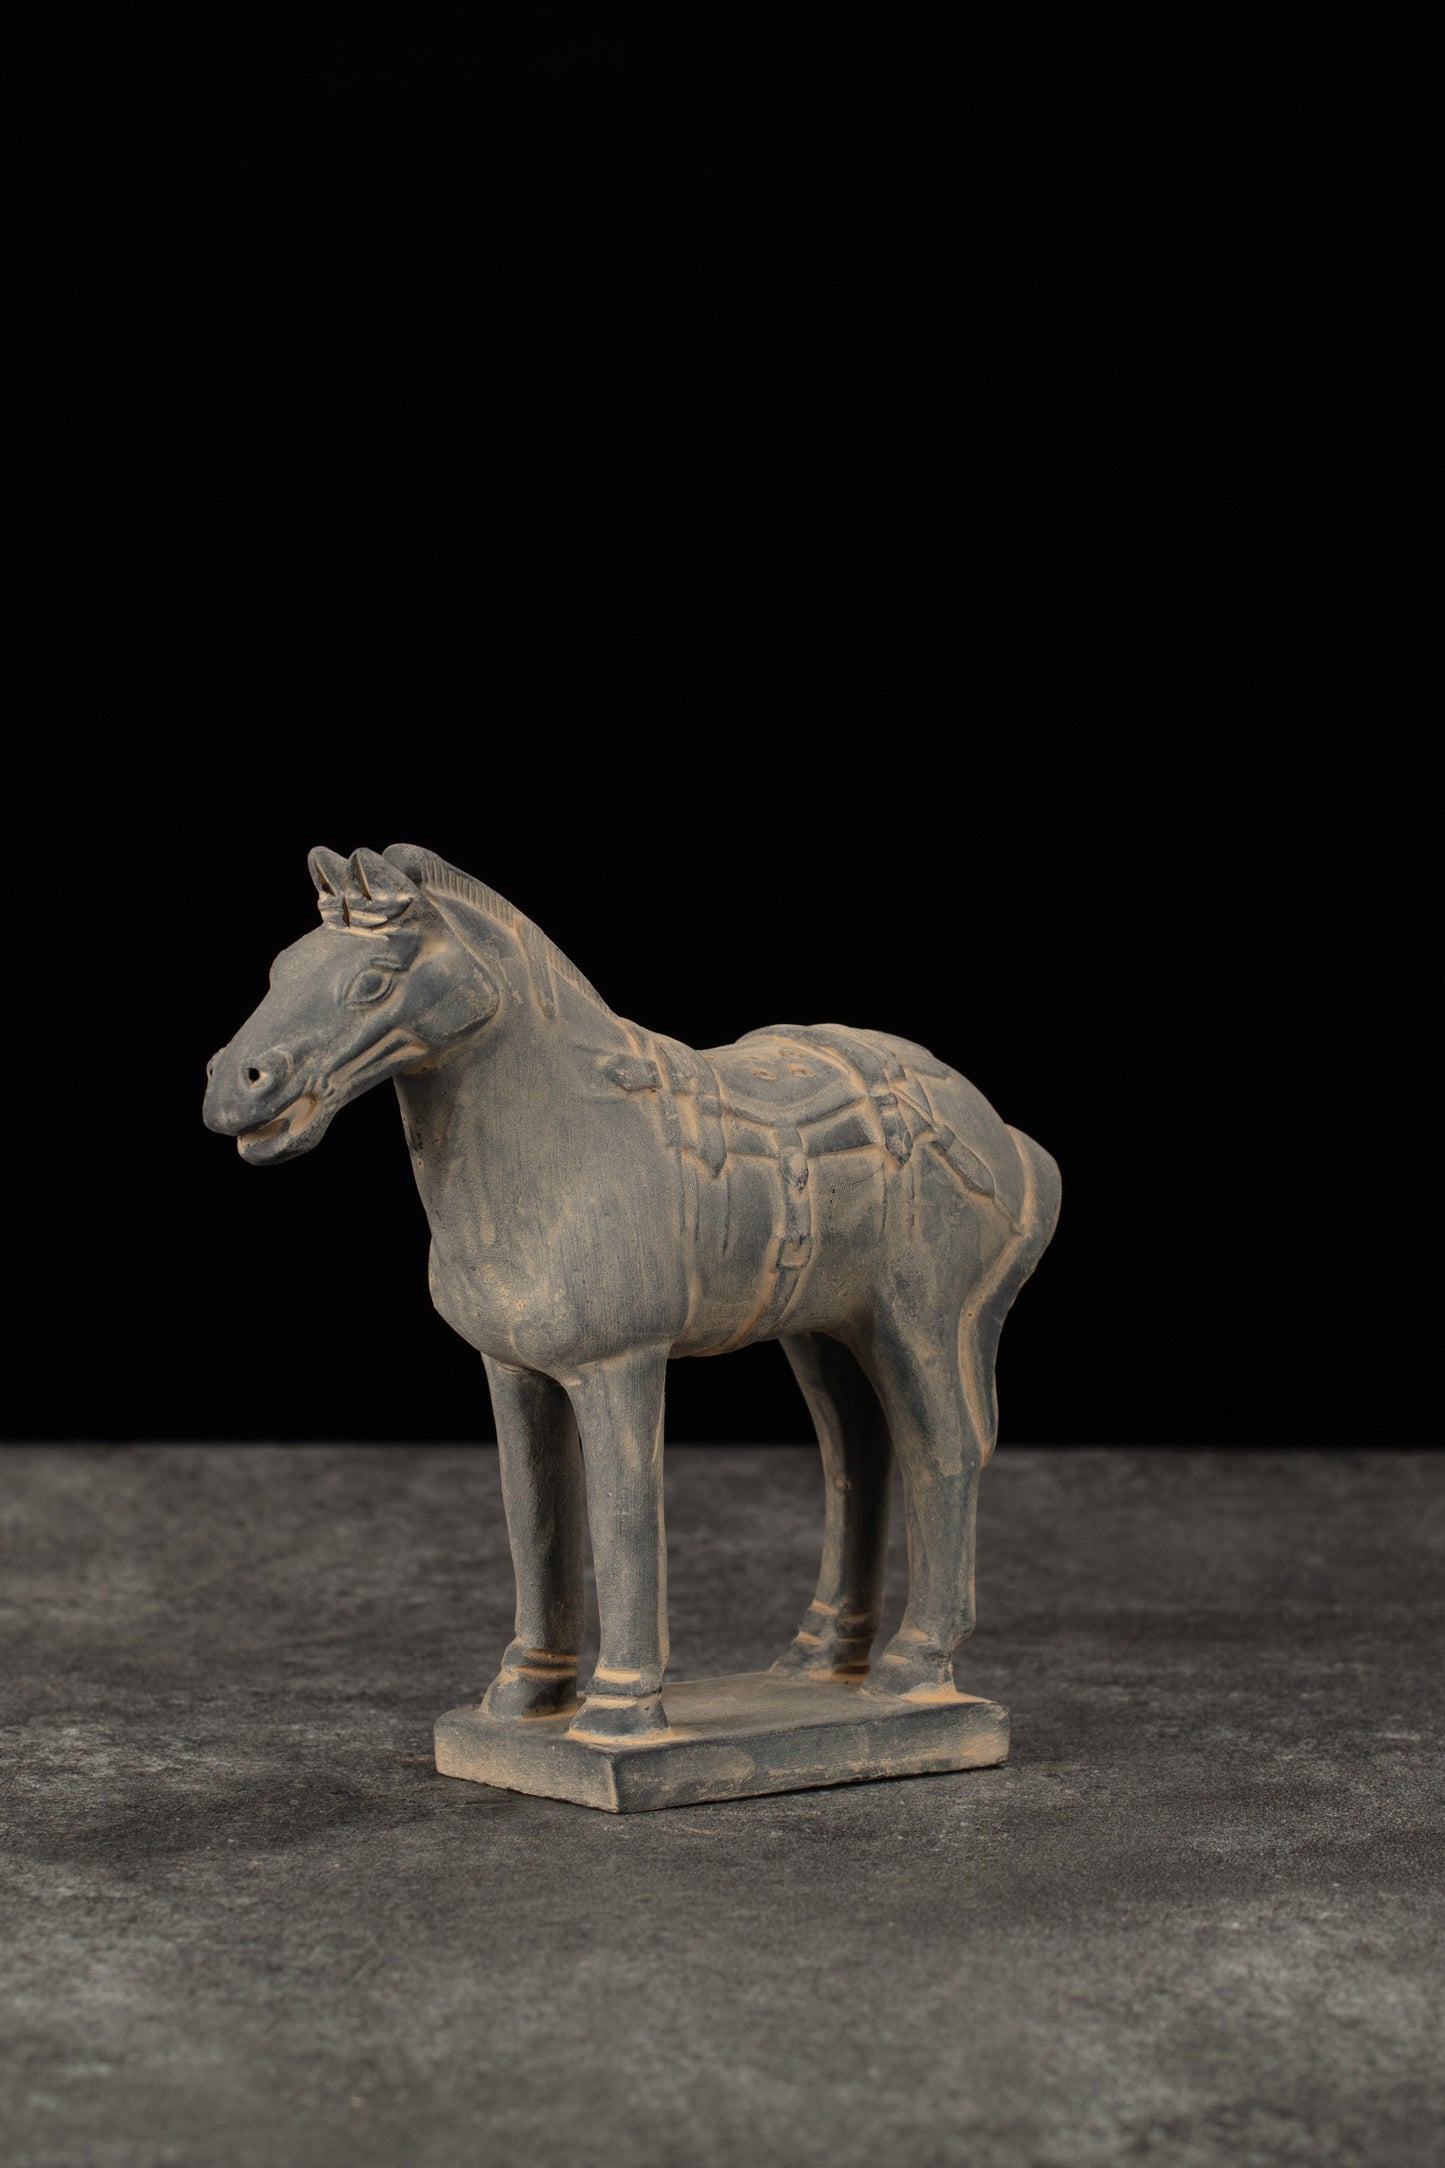 15CM Horse - CLAYARMY -Profile shot emphasizing the regal posture and proportions of our 15CM Clayarmy Terracotta Horse.